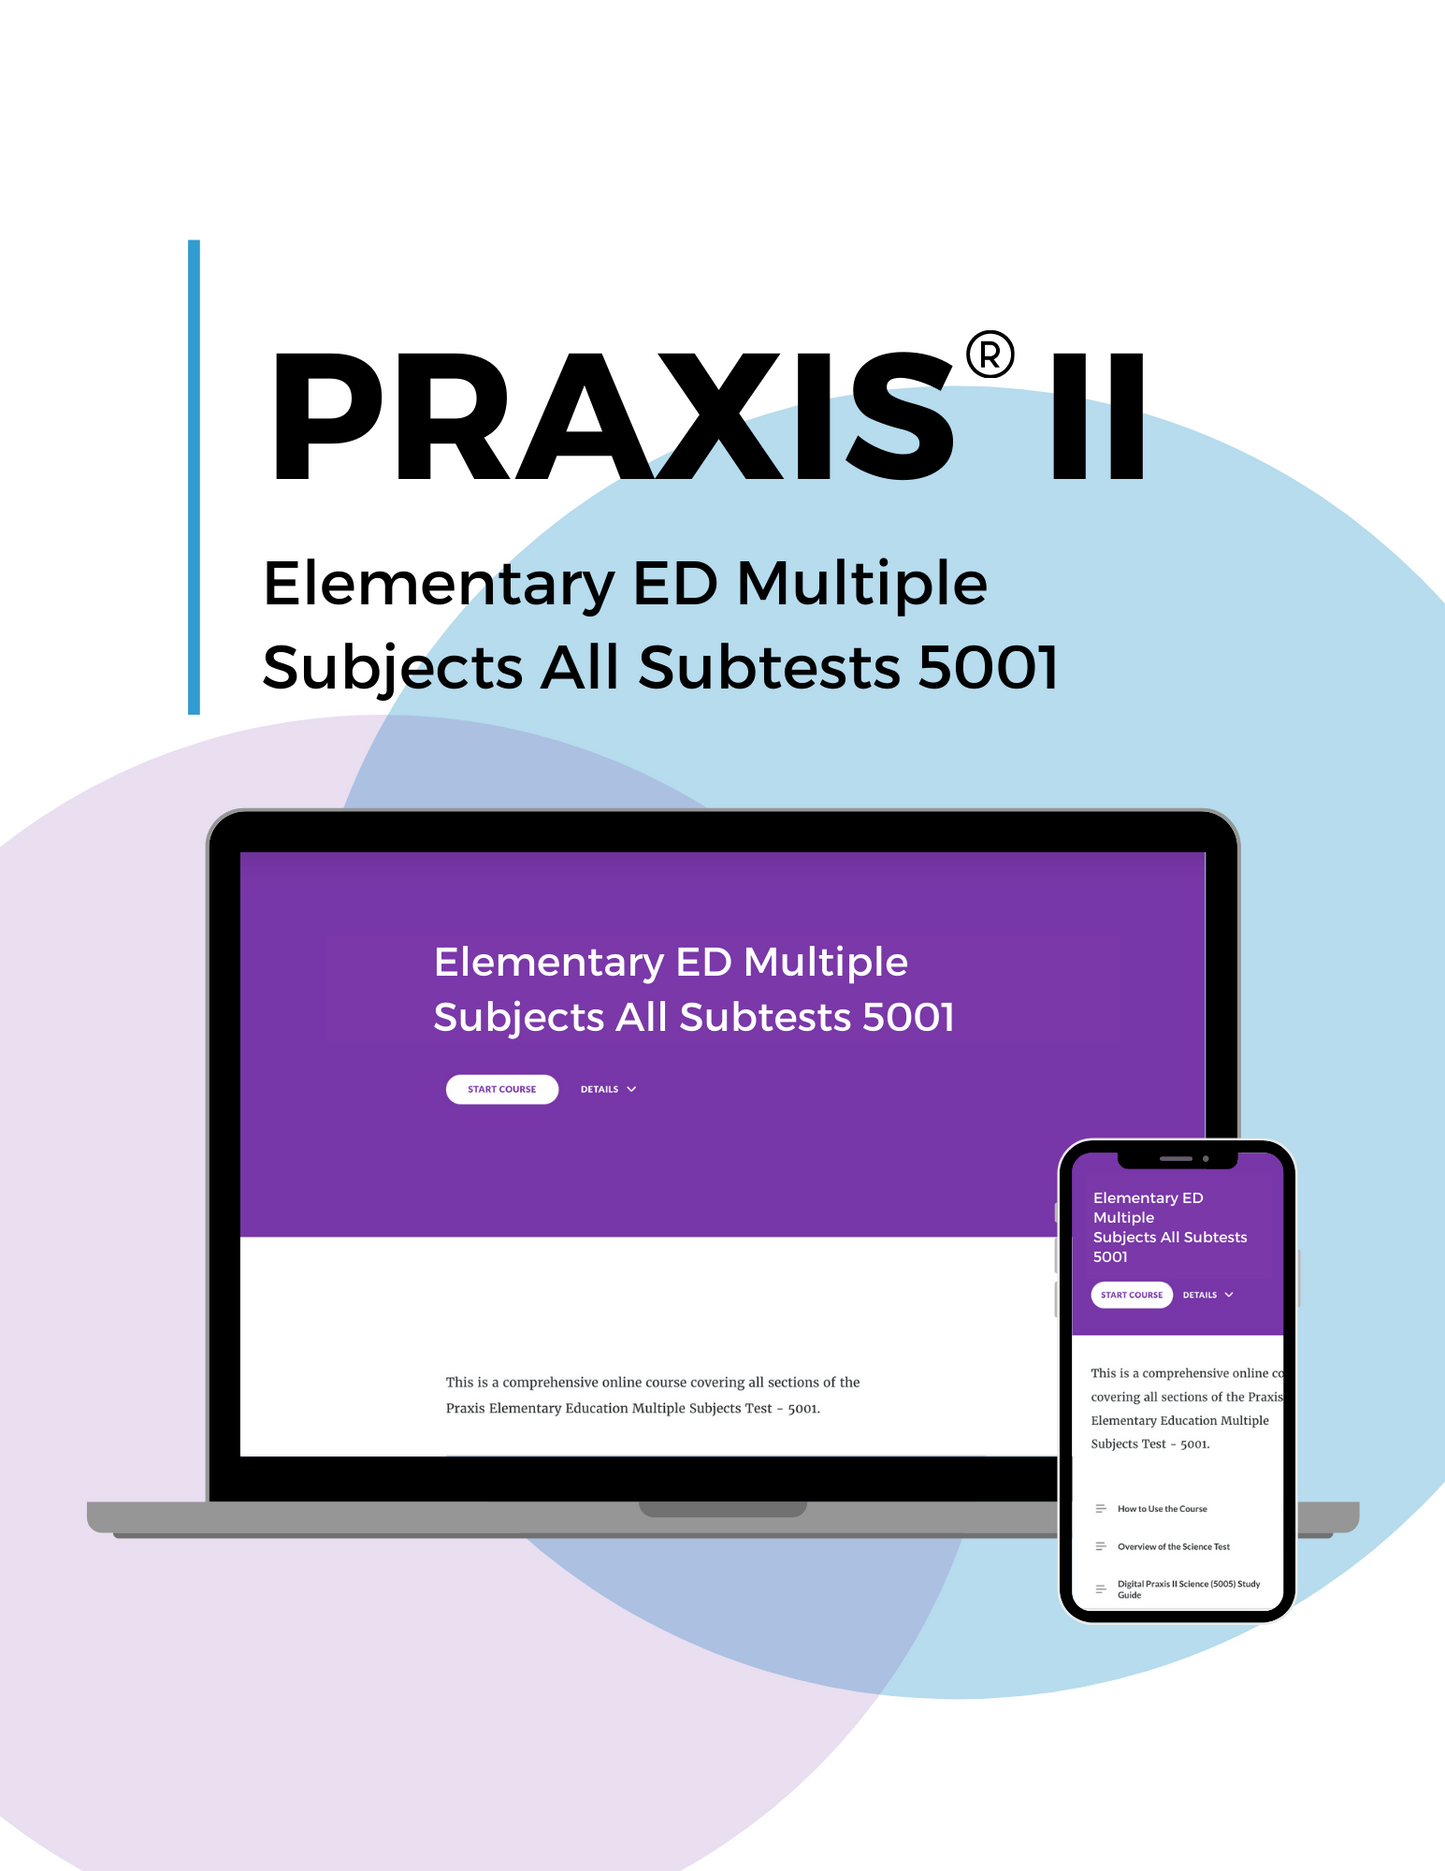 Praxis II Elementary Education Multiple Subjects Online Courses